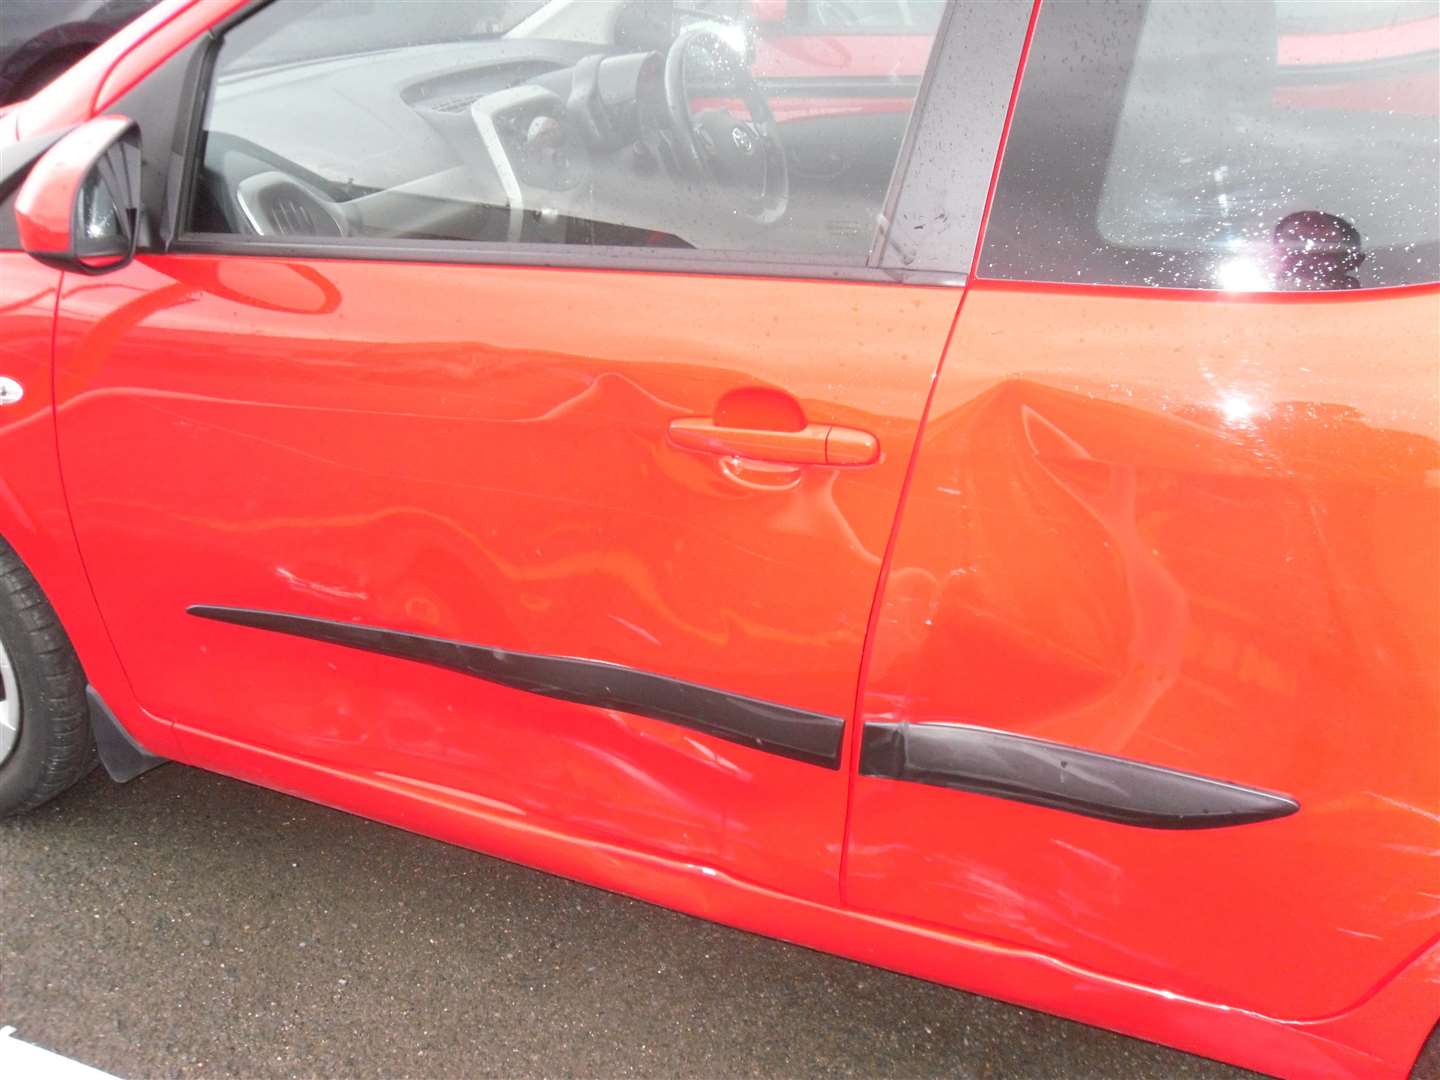 The terrifying incident with the lorry left Michael Reynolds's car with significant damage